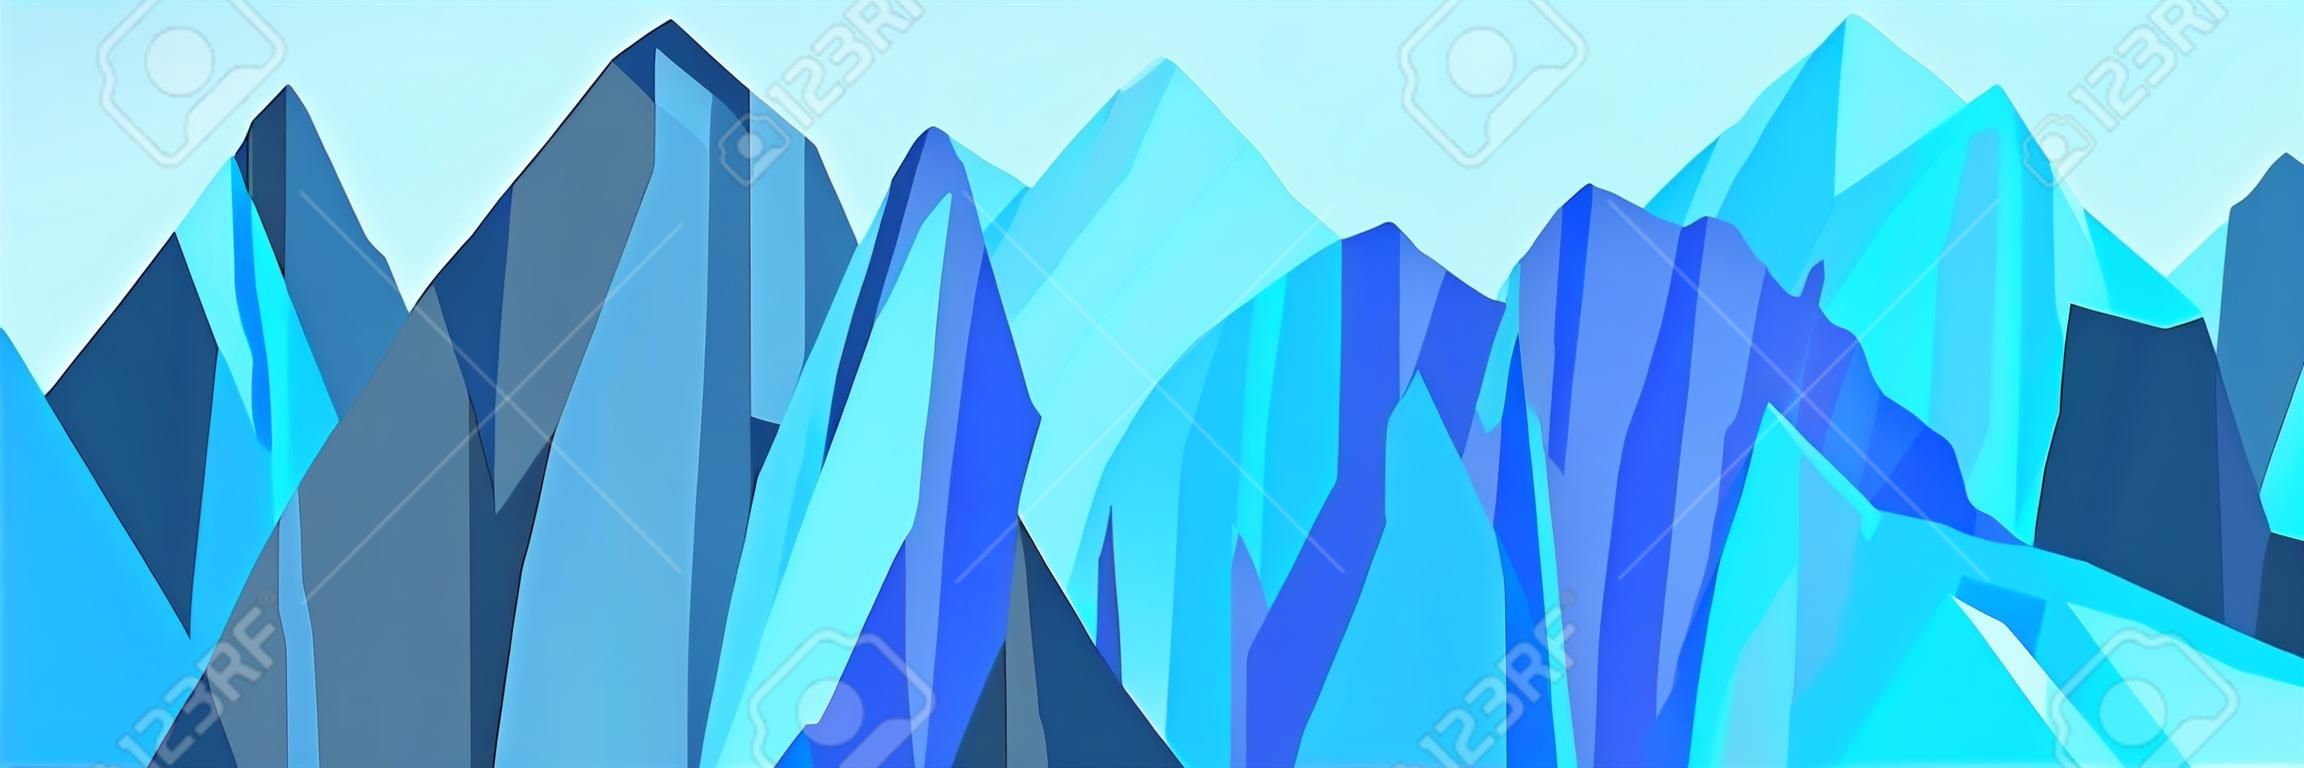 Abstract logo of mountain ranges, blue tones. Vector background